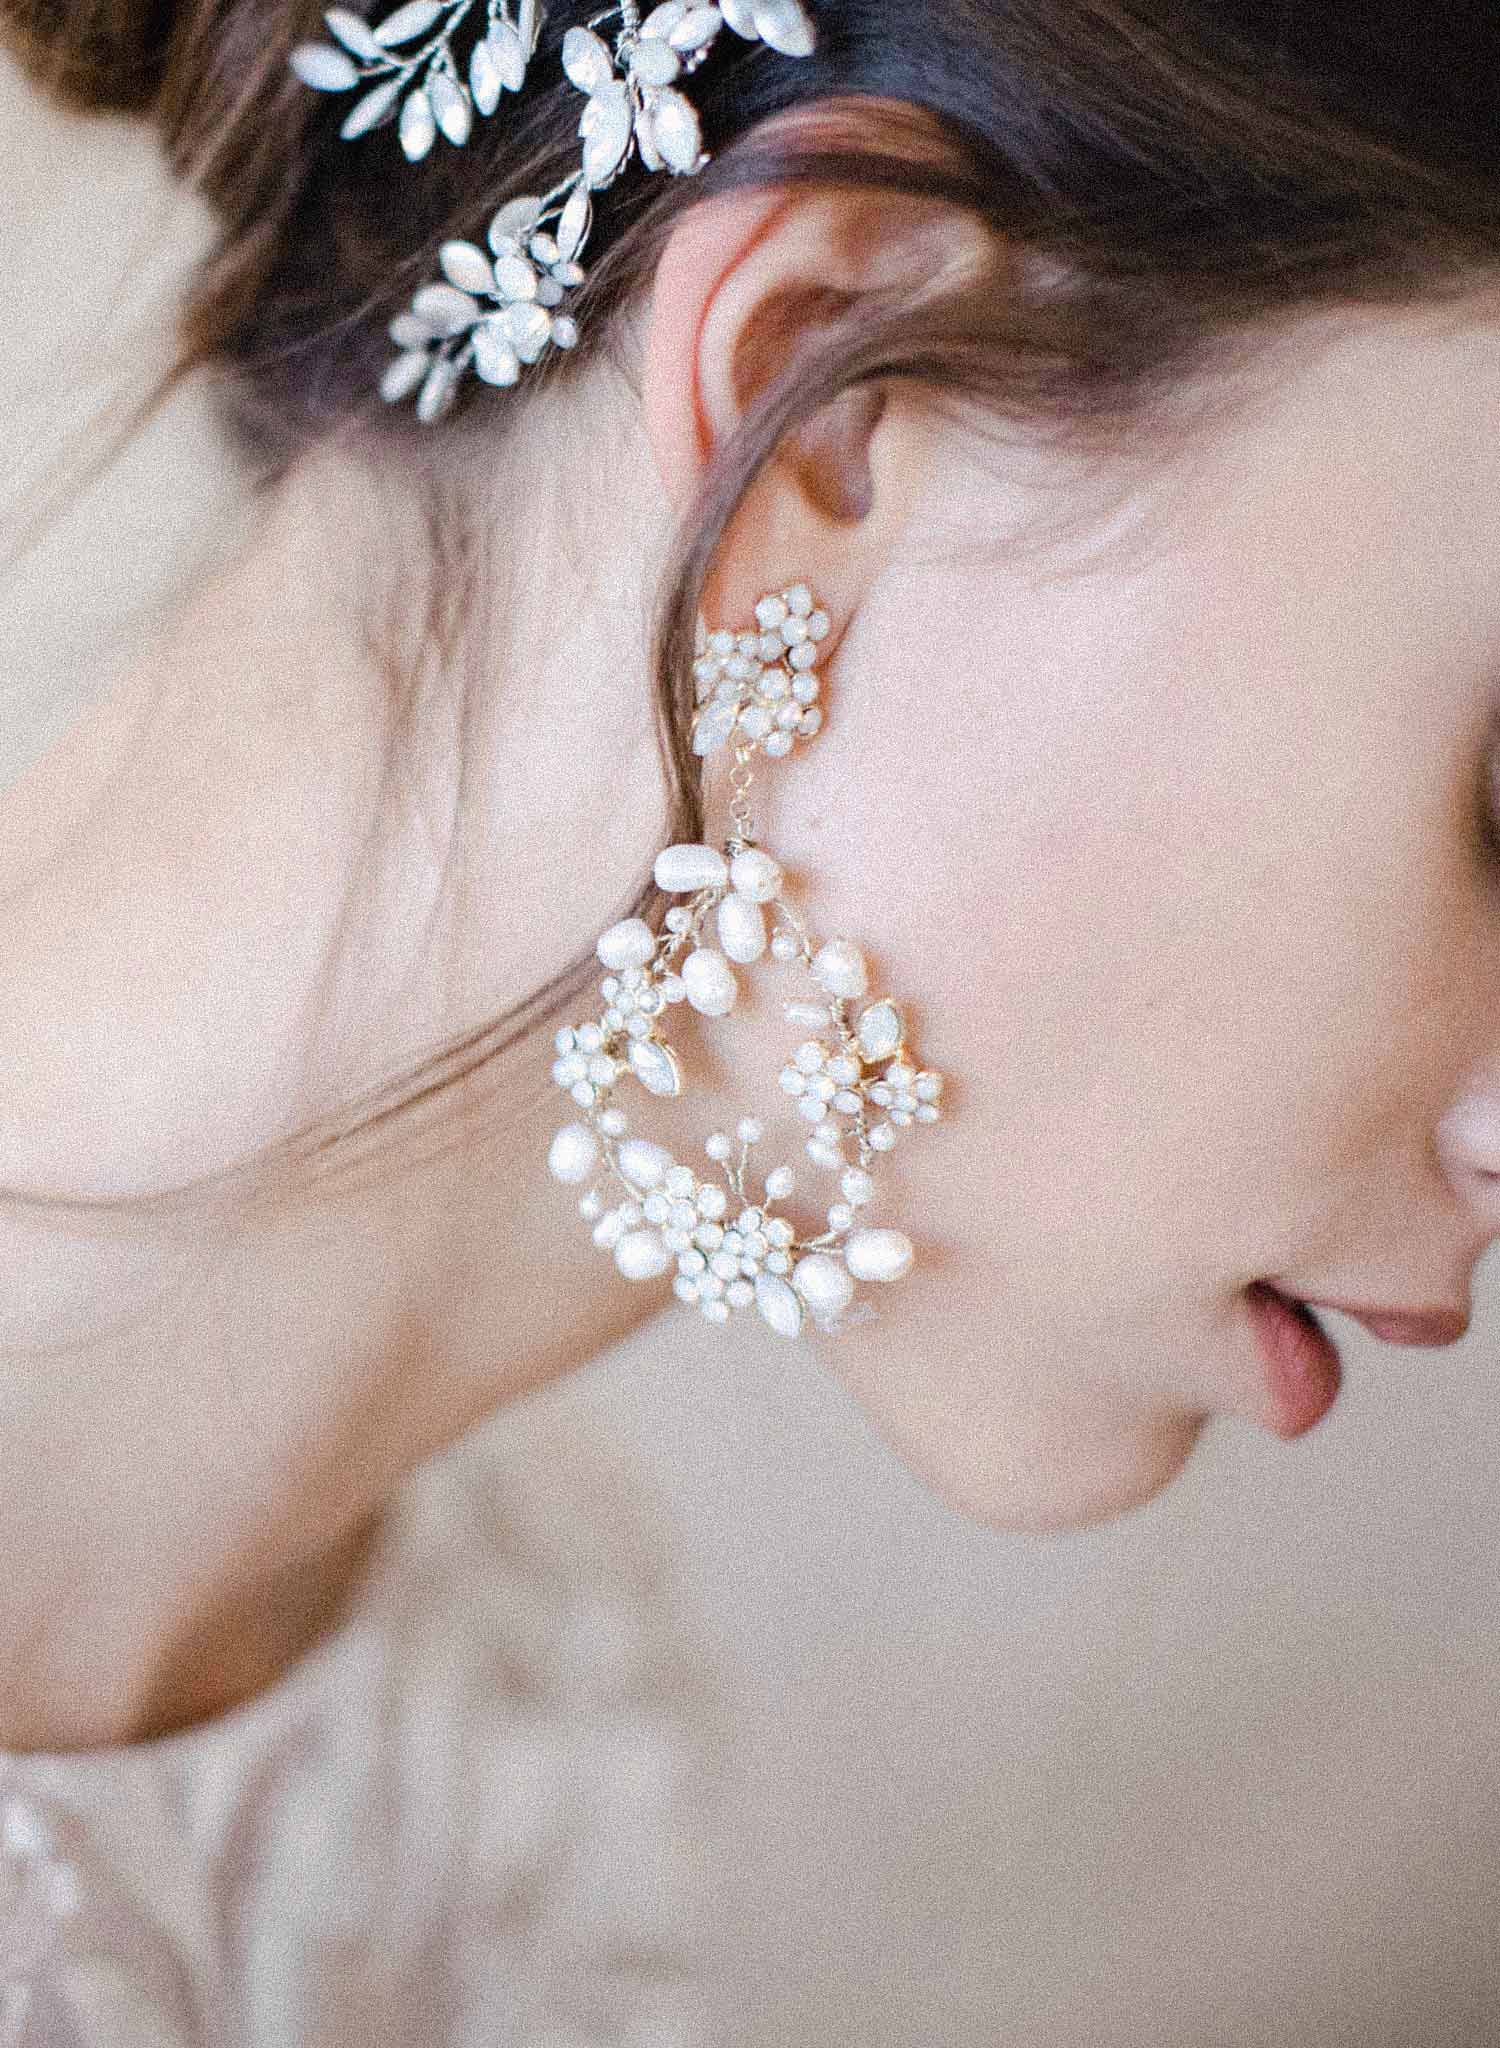 The 10 Best Wedding Jewelers in Naperville, IL - WeddingWire